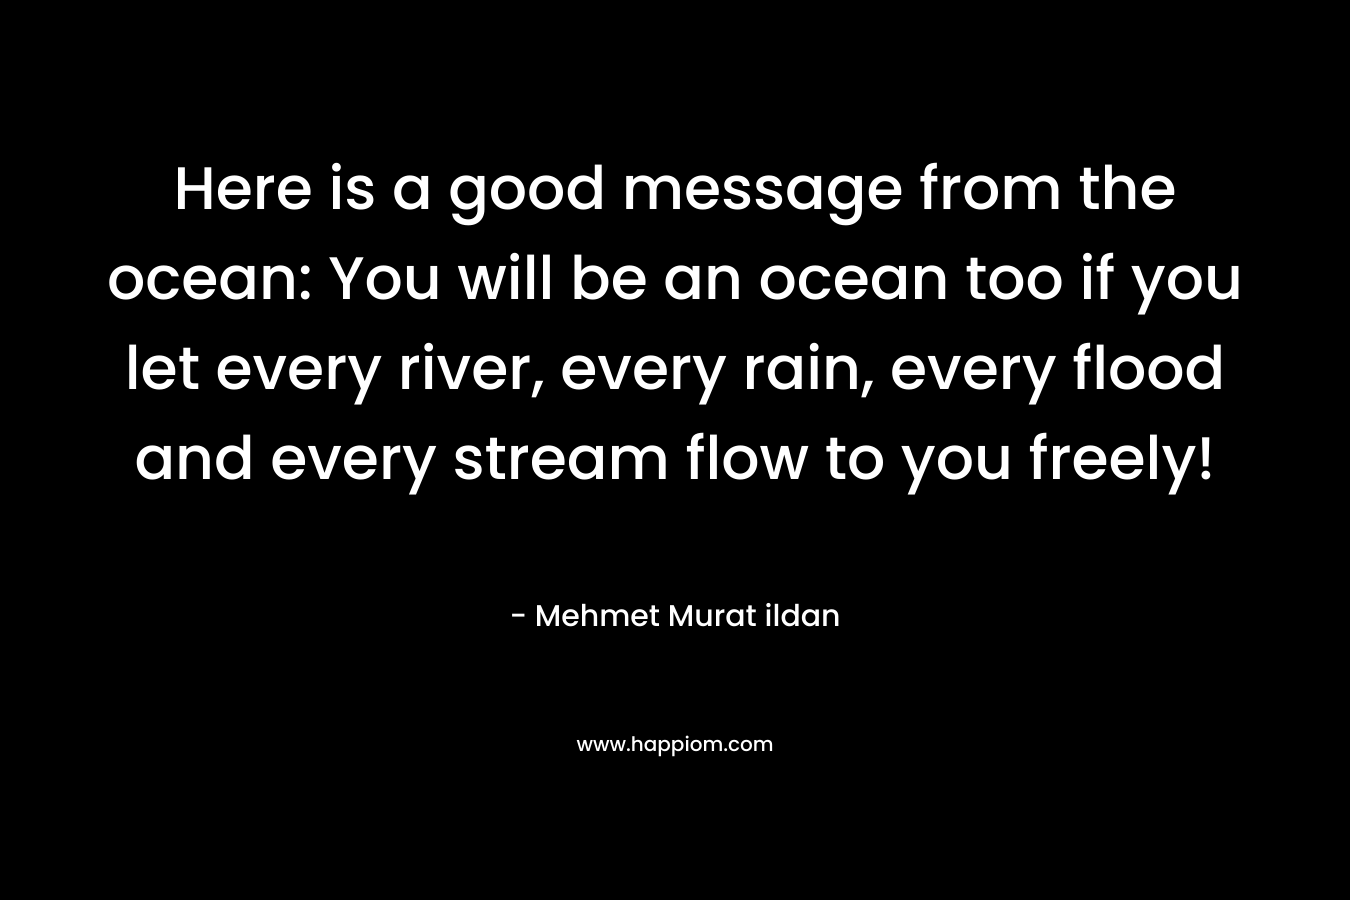 Here is a good message from the ocean: You will be an ocean too if you let every river, every rain, every flood and every stream flow to you freely!